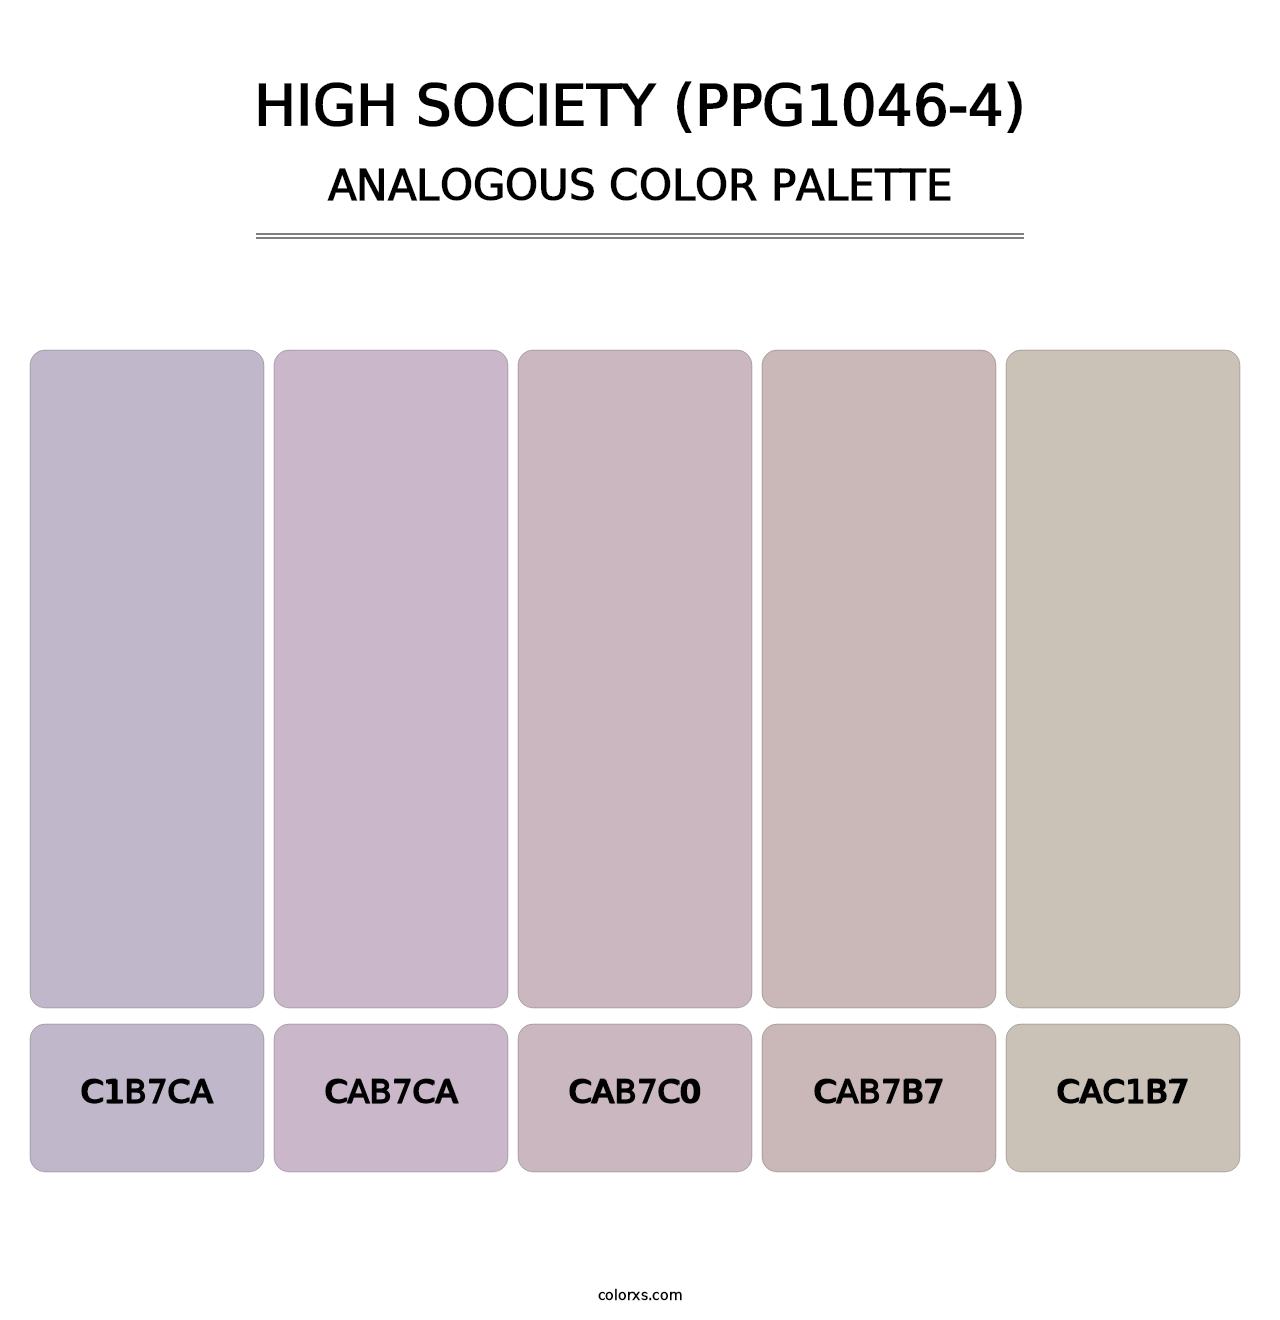 High Society (PPG1046-4) - Analogous Color Palette